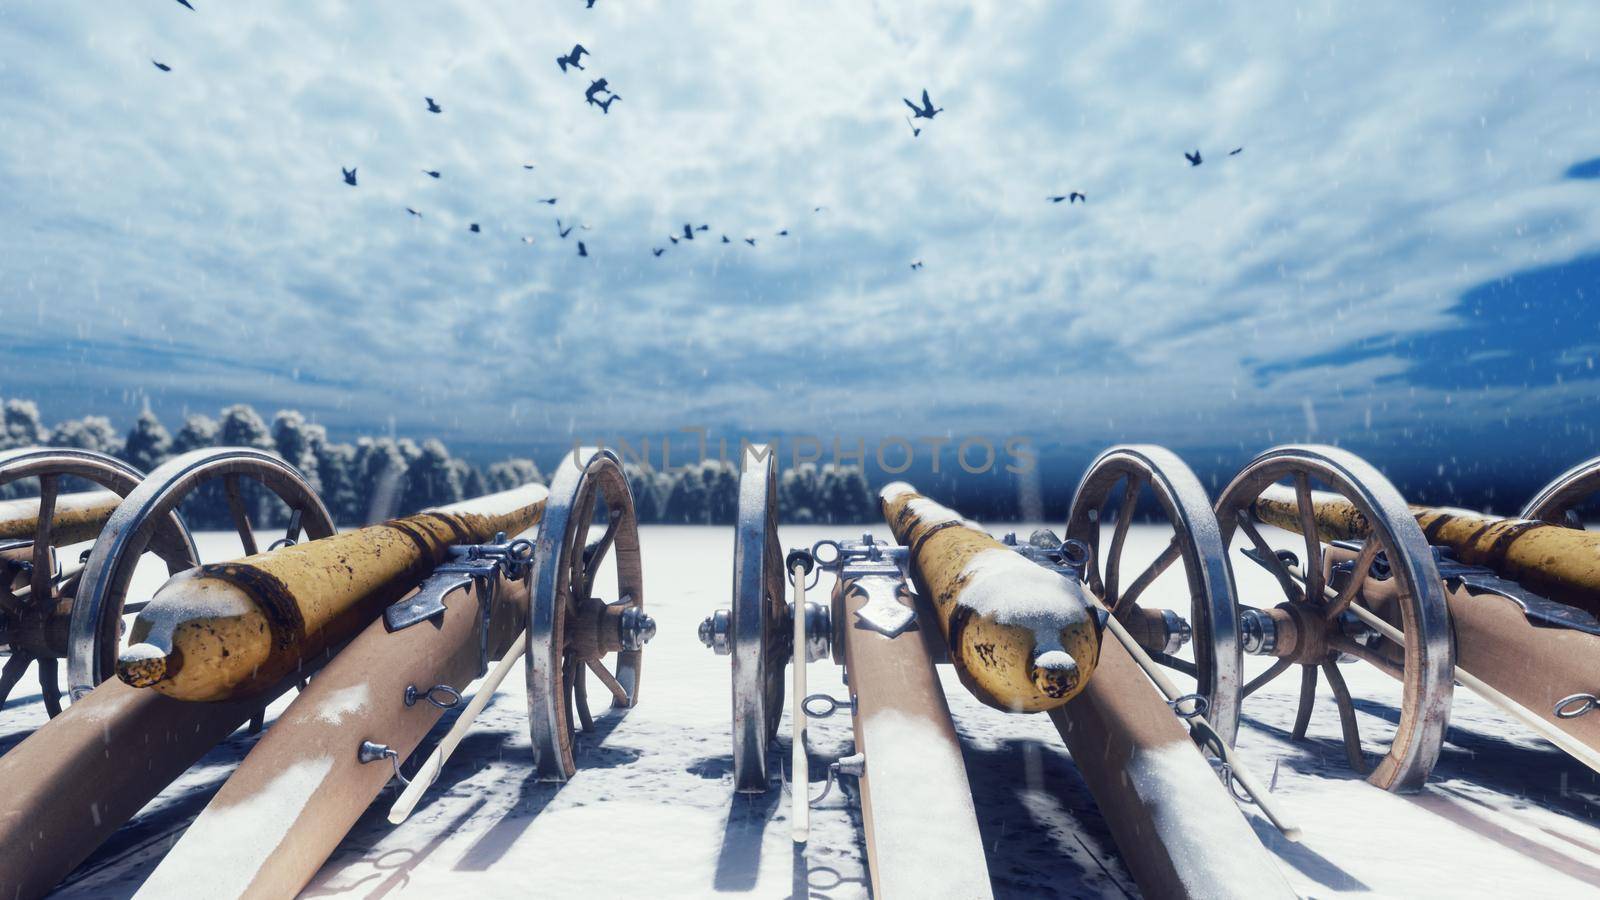 Medieval cannons in the winter field, in the snow on a cloudy day, before the battle. Falling snow, drifts and cannons ready for battle. 3D Rendering by designprojects